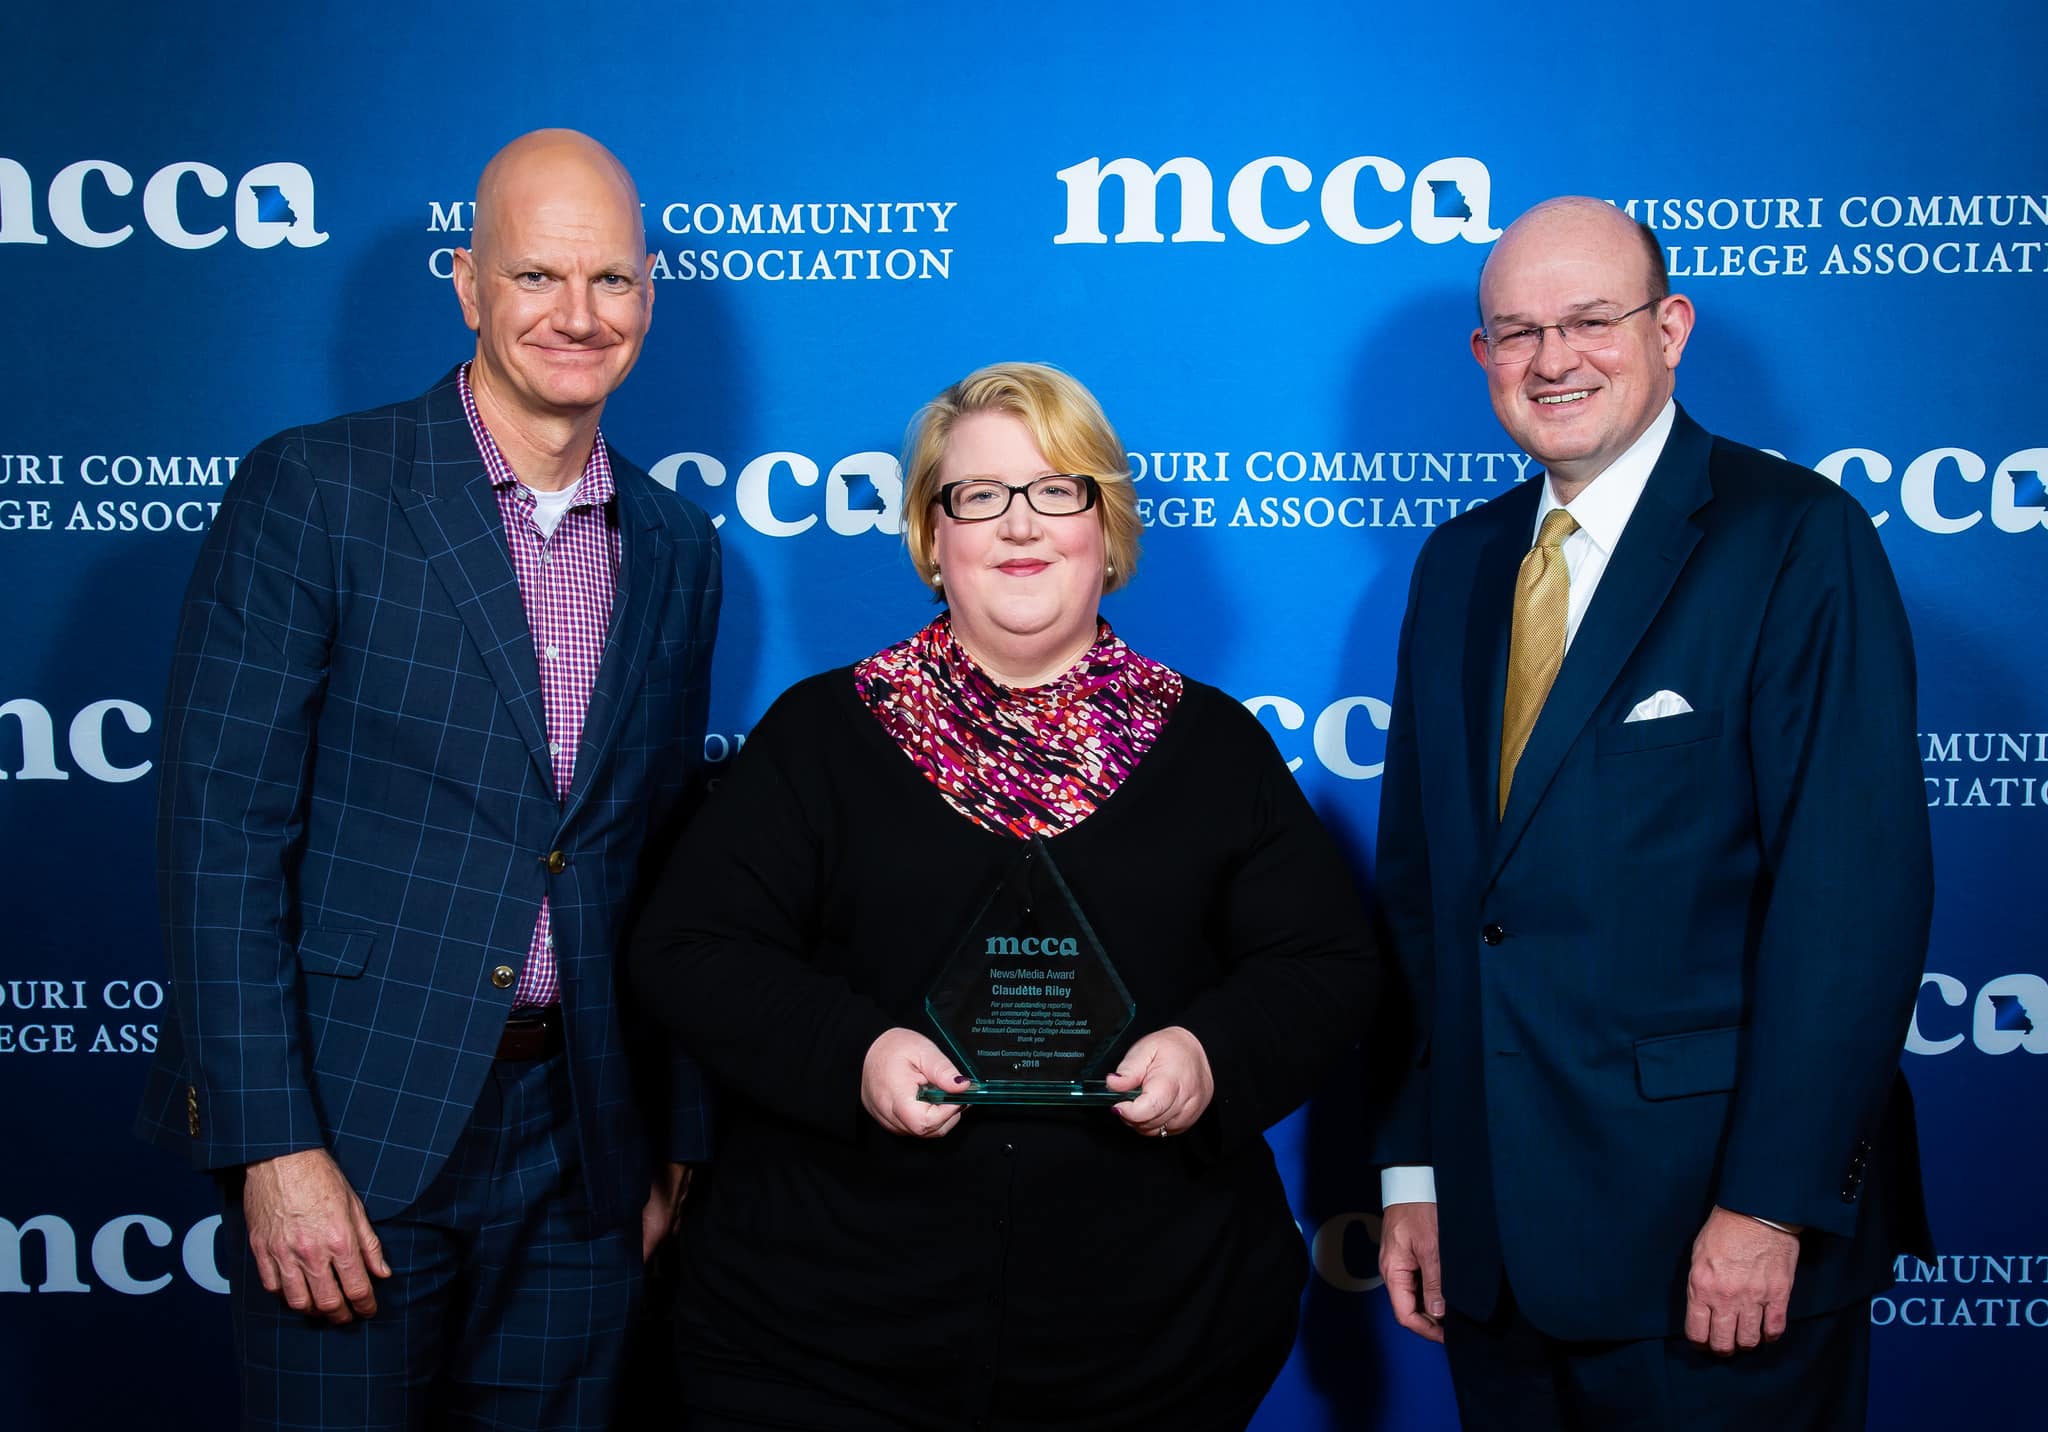 OTC employees, community partners honored at MCCA convention